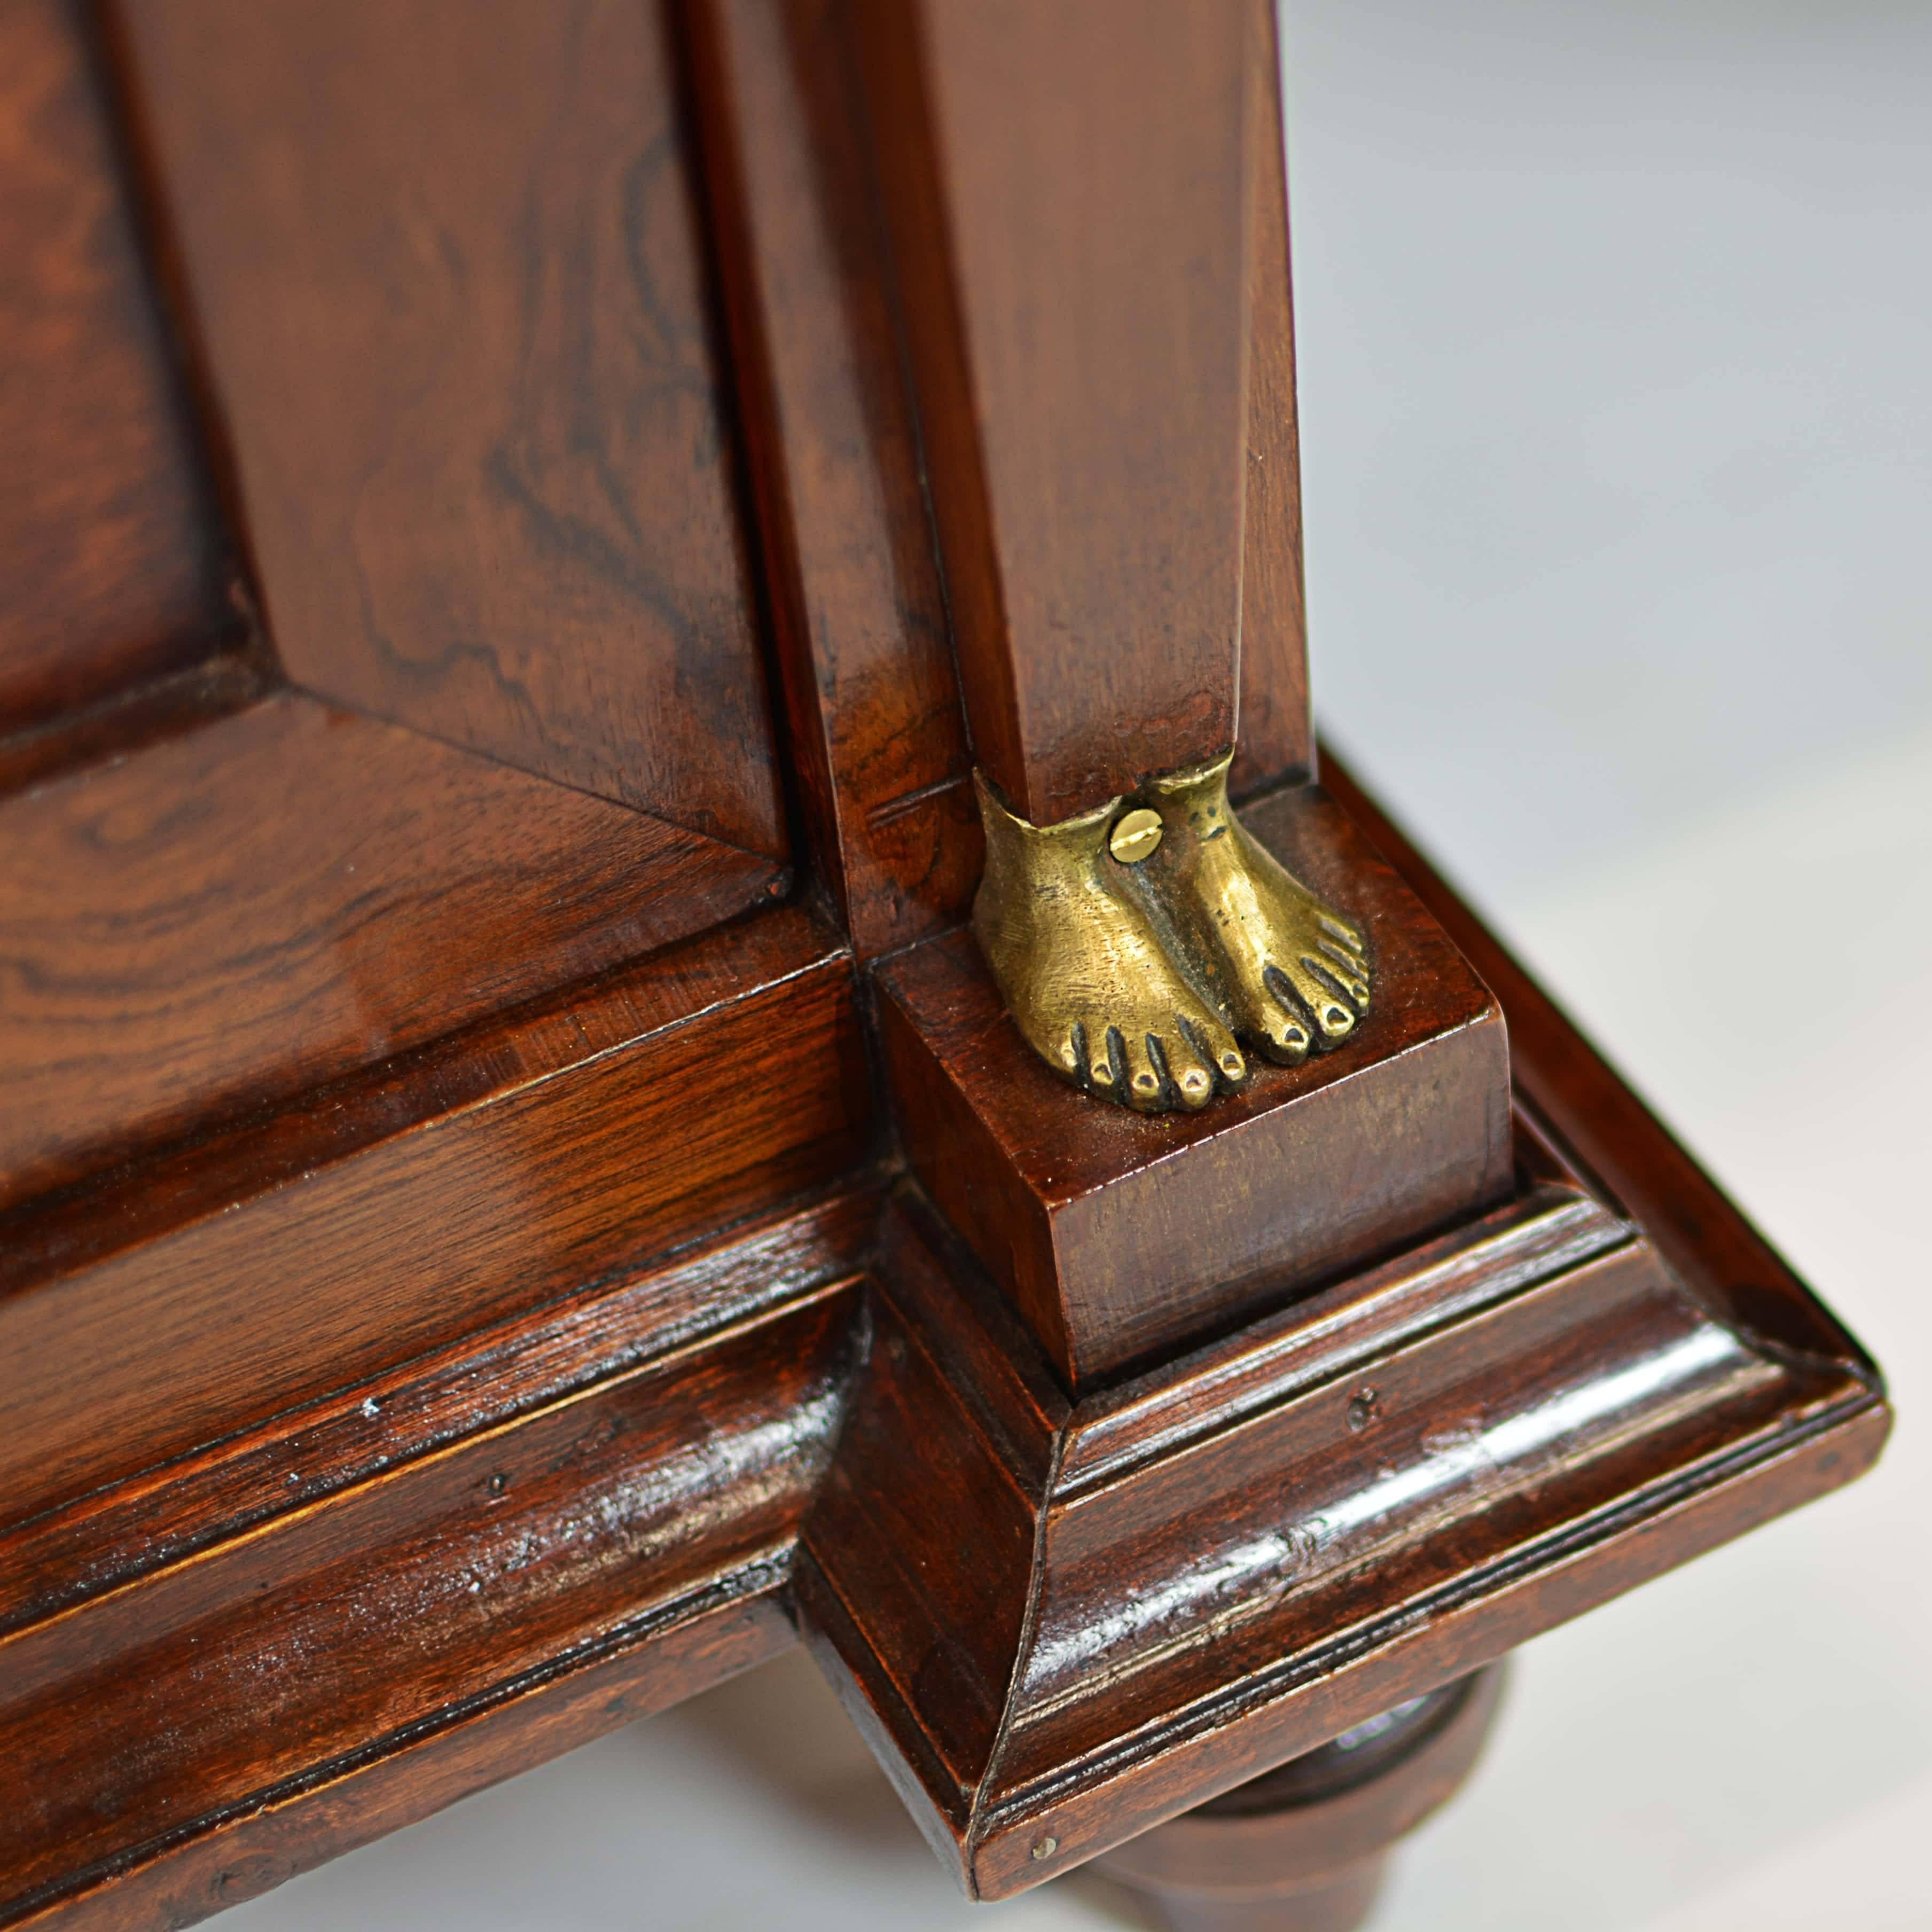 Imposing elegance for the estate office. Rare to find such a quality heavy wooden desk from France from the Napoleonic era, circa 1815. The dark, rich finish and classical-themed gilt ornaments are perfect examples of post-Revolution design; the